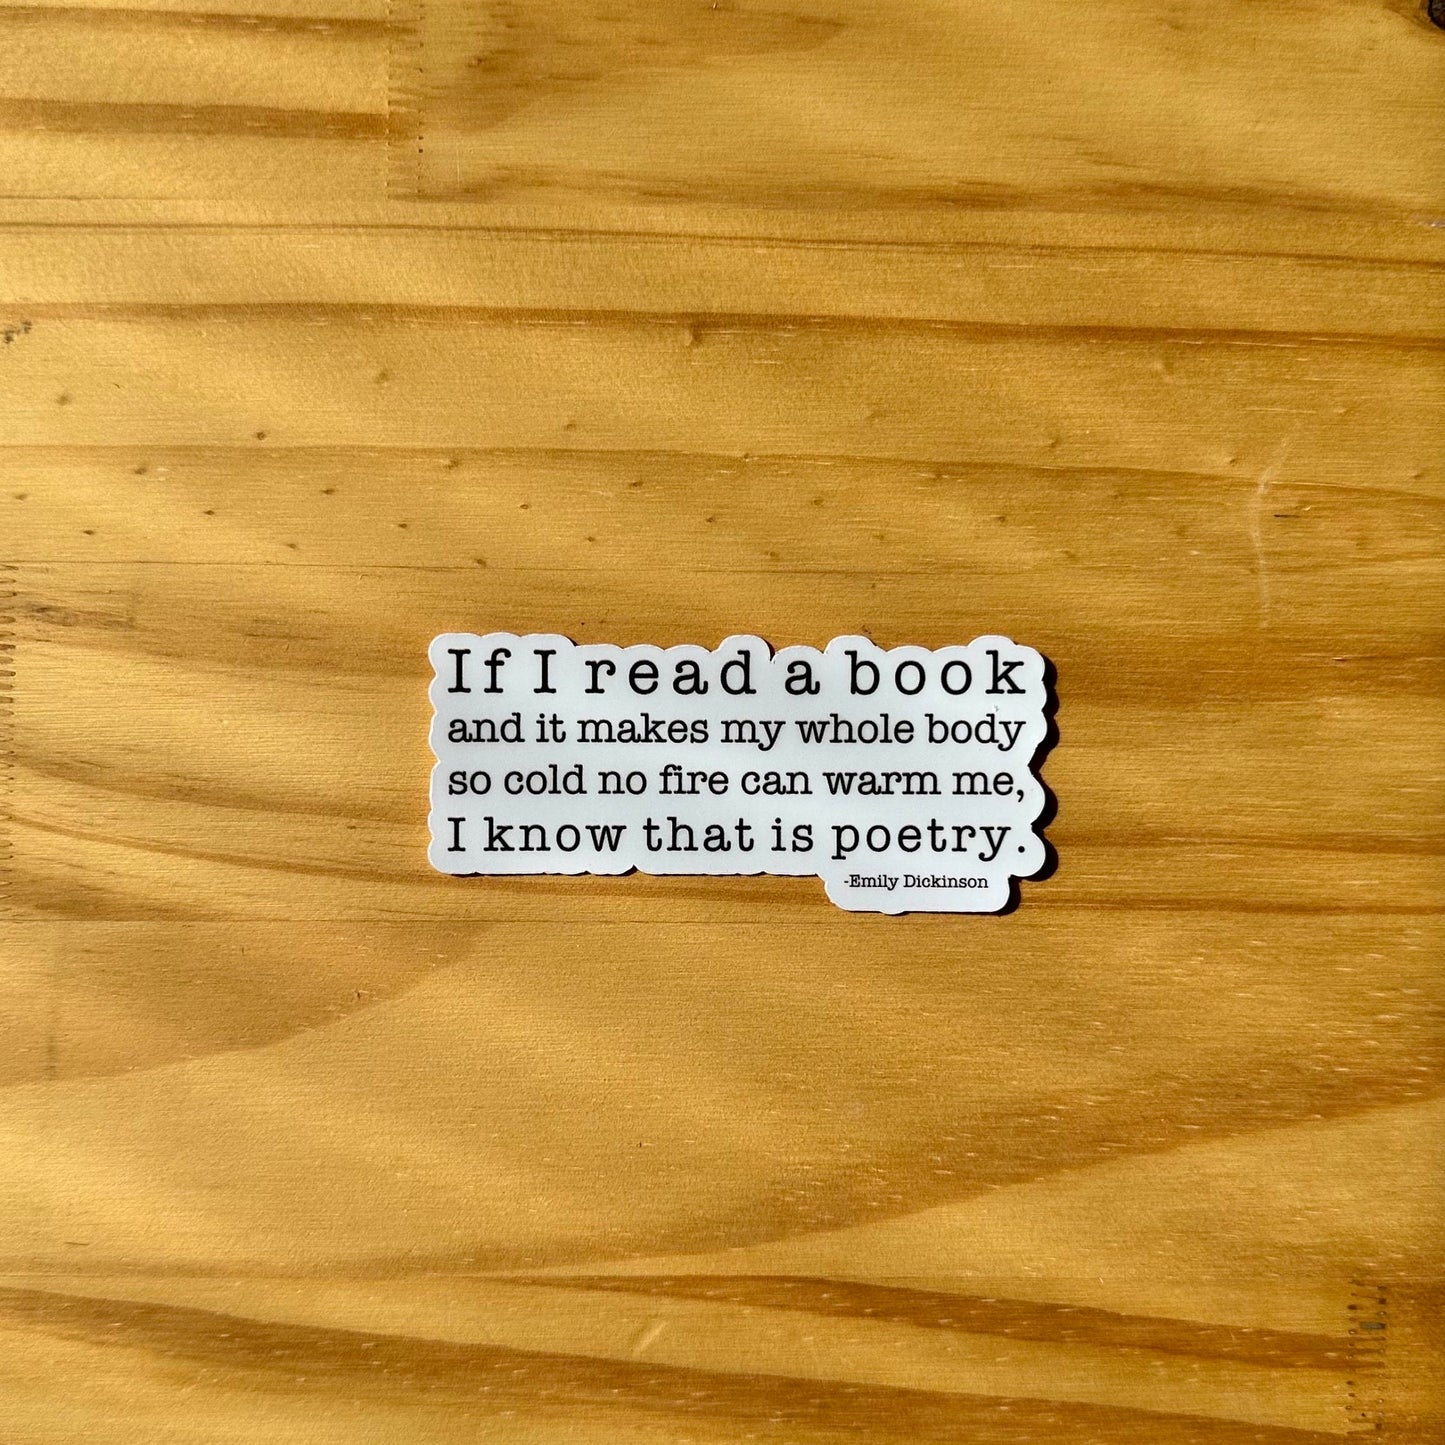 "I know that is poetry" Sticker